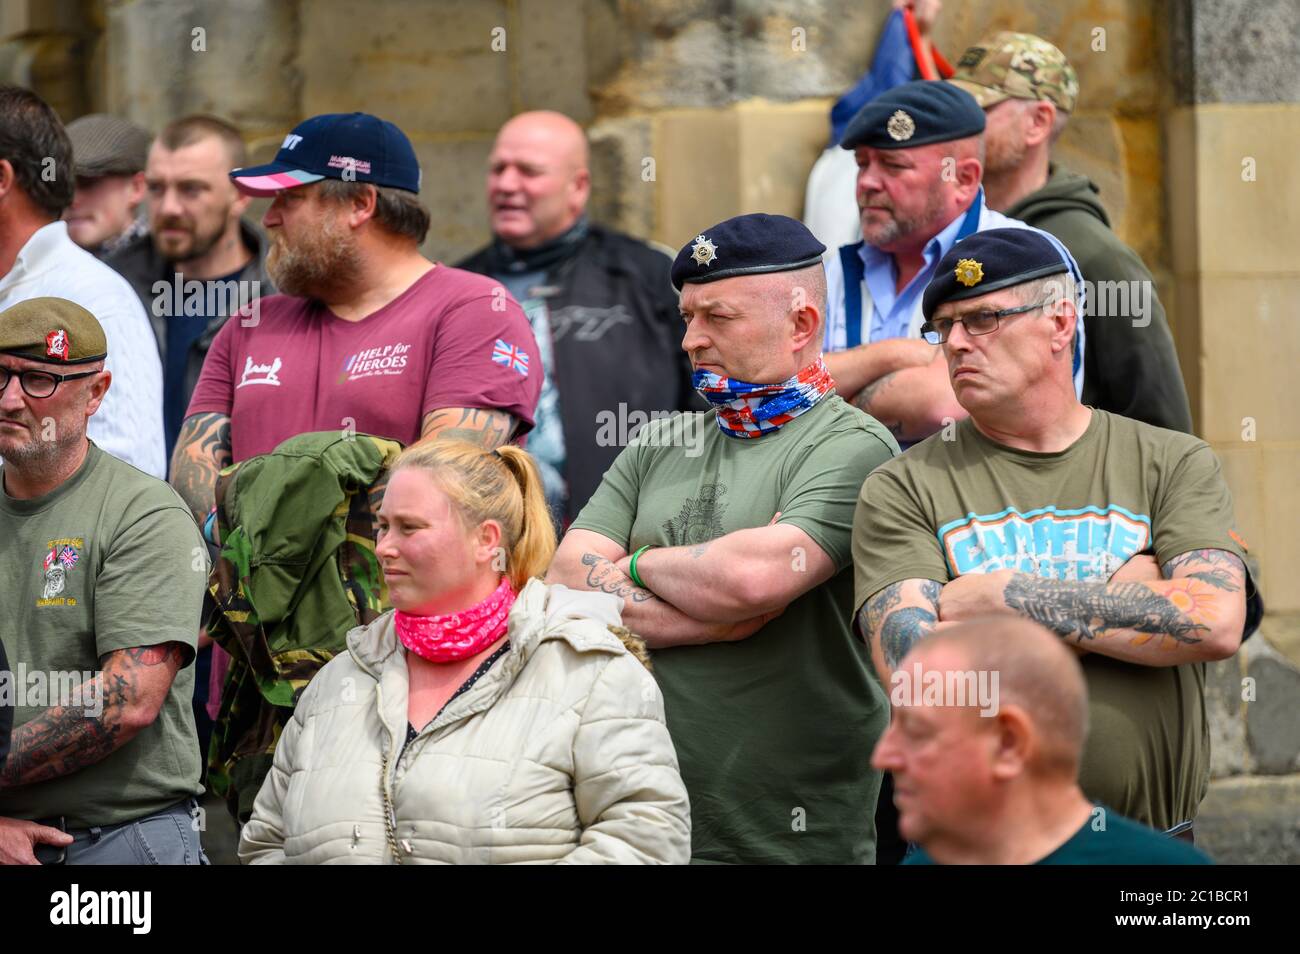 Richmond, North Yorkshire, UK - June 14, 2020: Angry Ex Servicemen Counter Protesters wear military berets at a Black Lives Matter protest Stock Photo